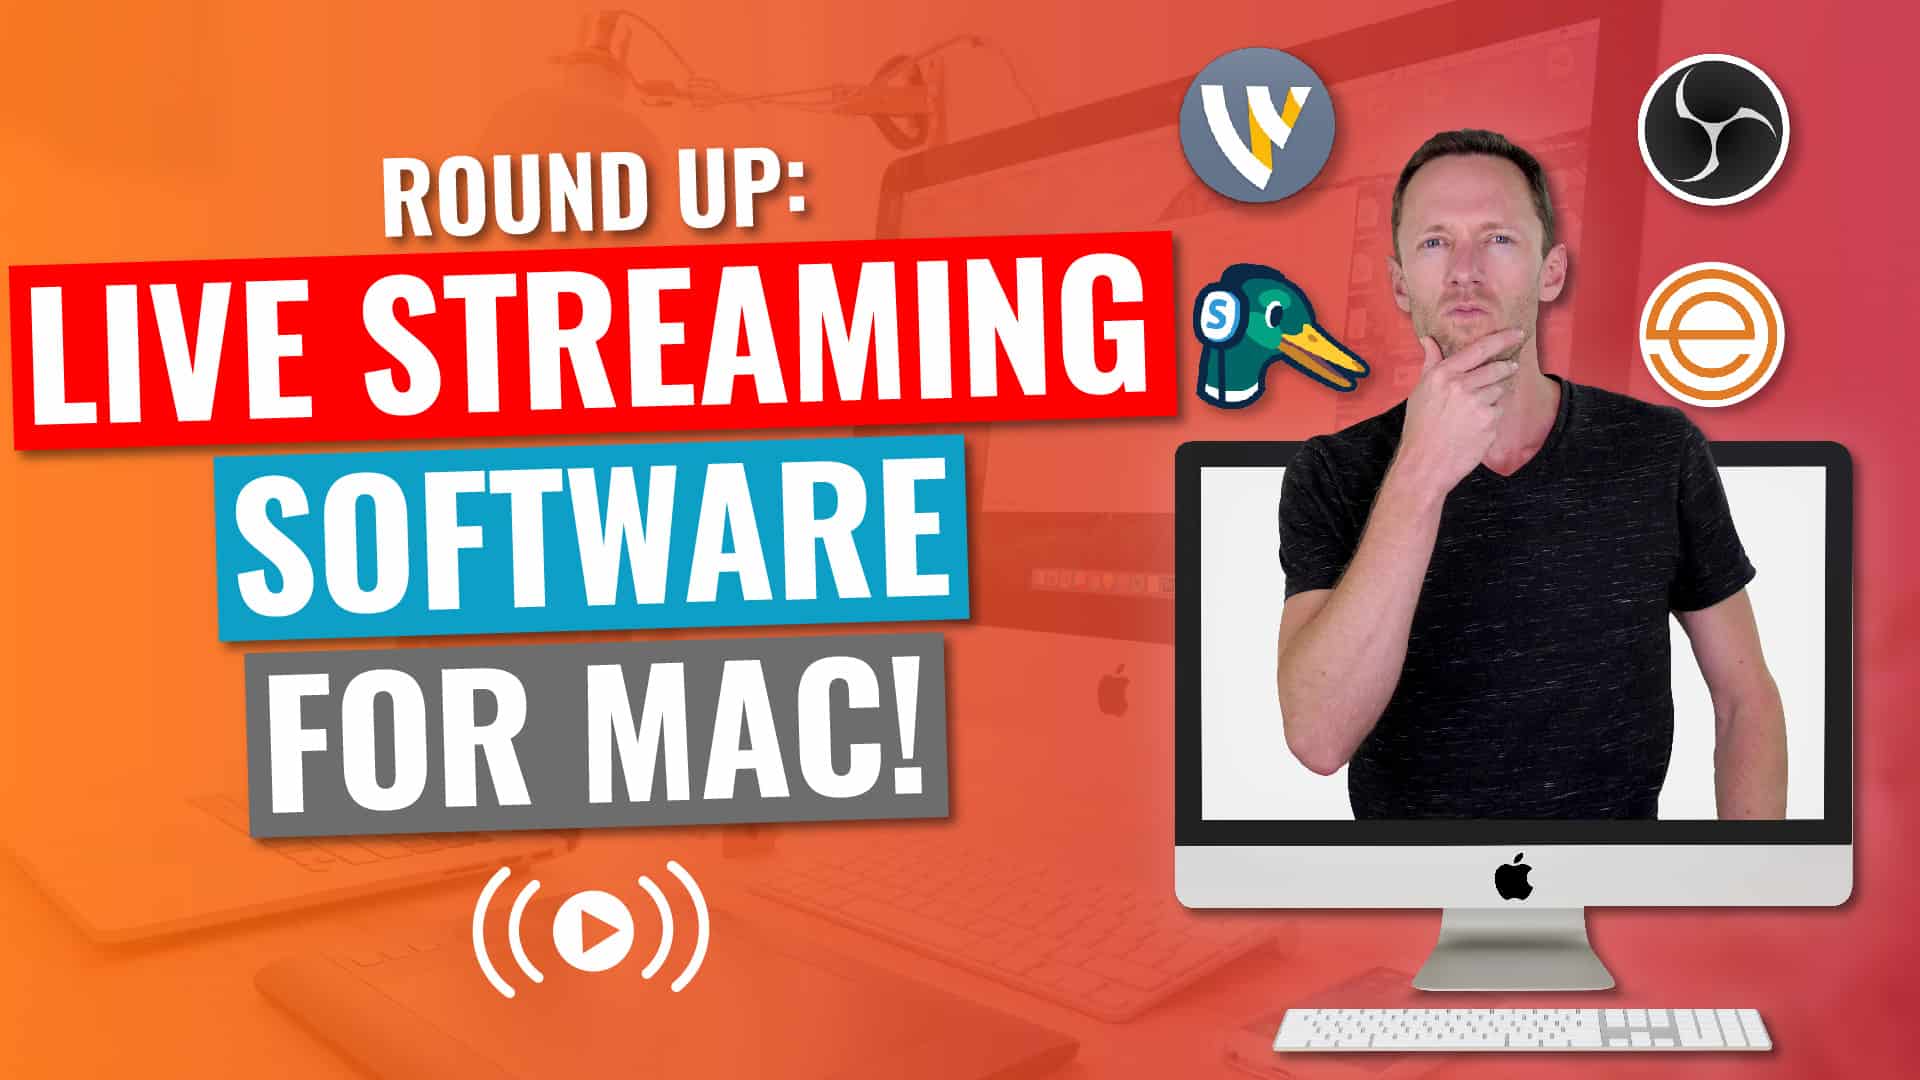 Best Live Streaming Software for Mac? 2020 Review!